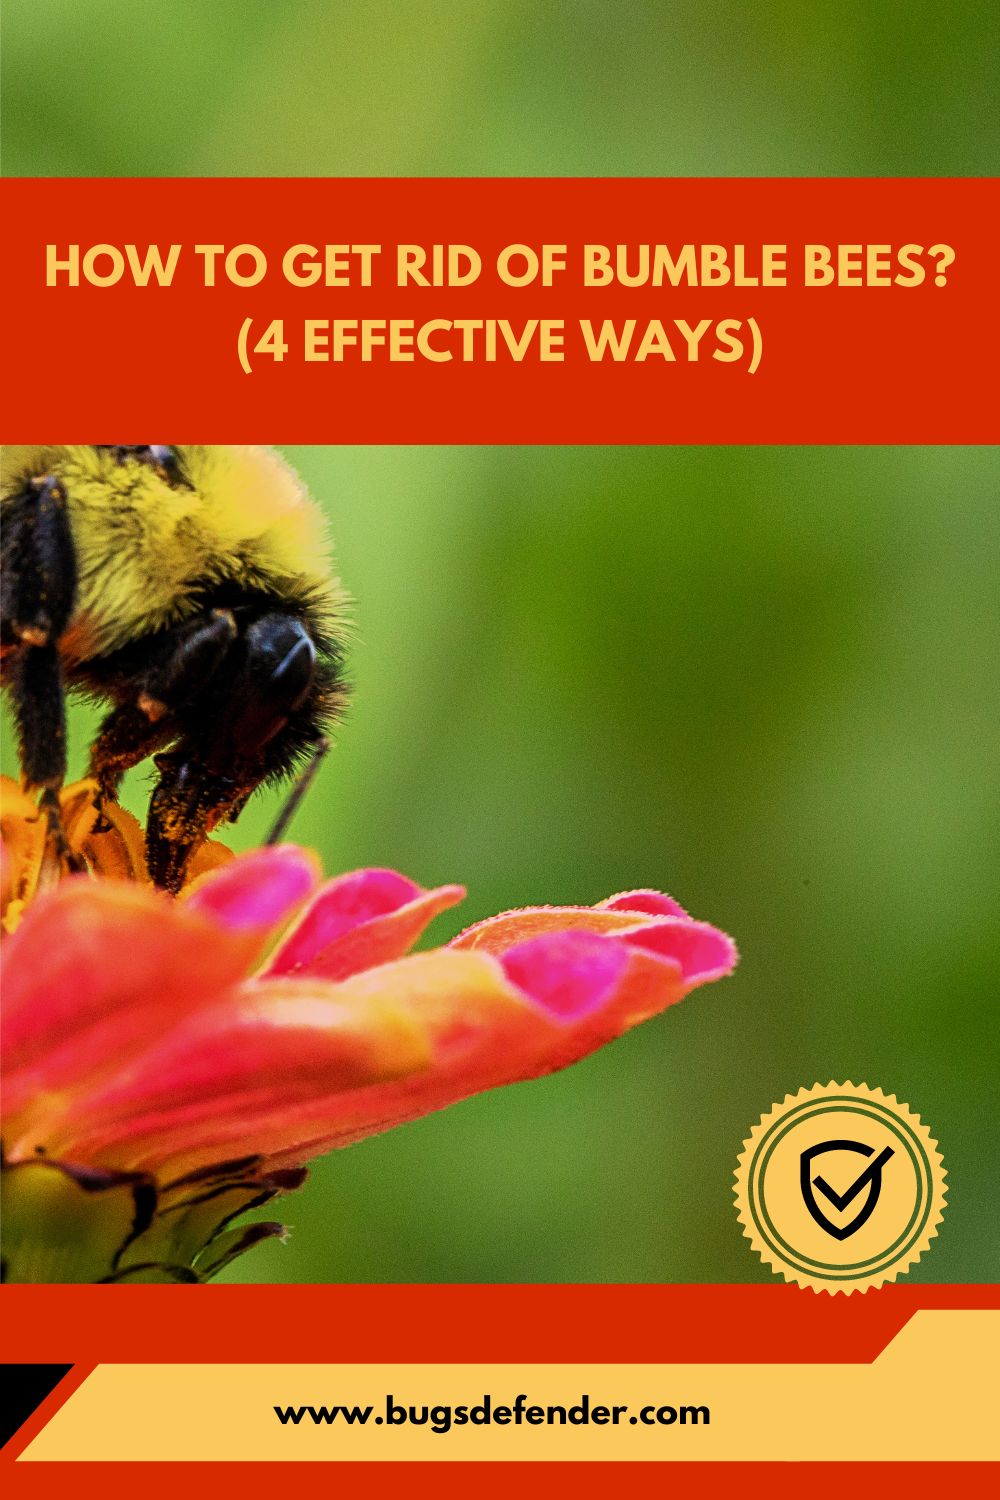 How To Get Rid Of Bumble Bees (4 Effective Ways) pin2